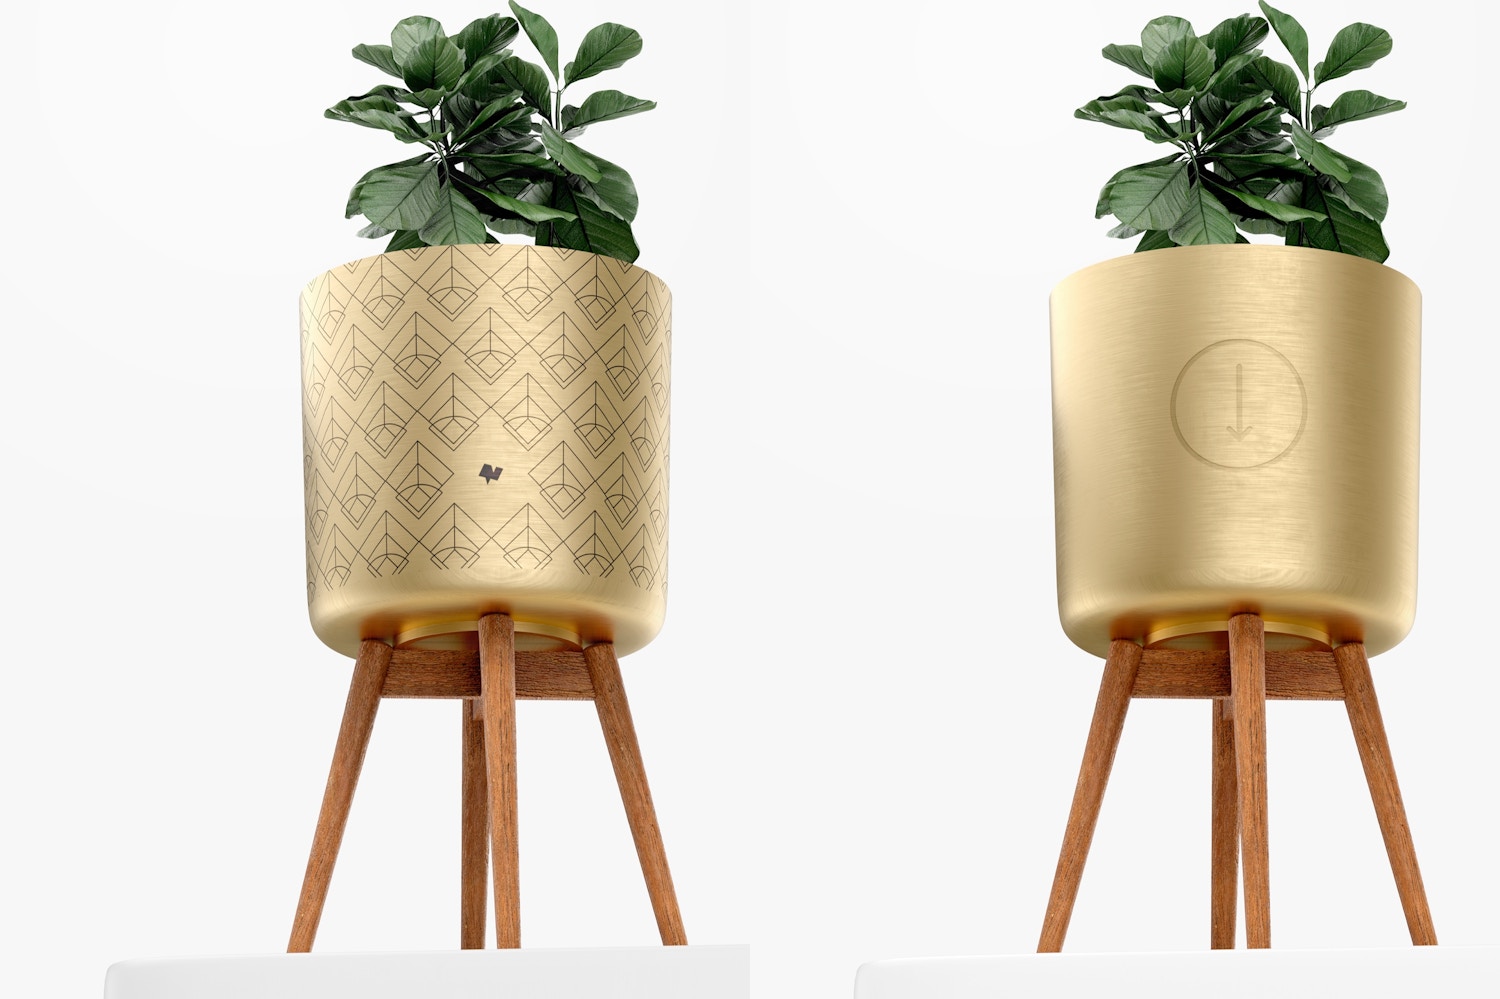 Brass Planter with Stand Mockup, Low Angle View